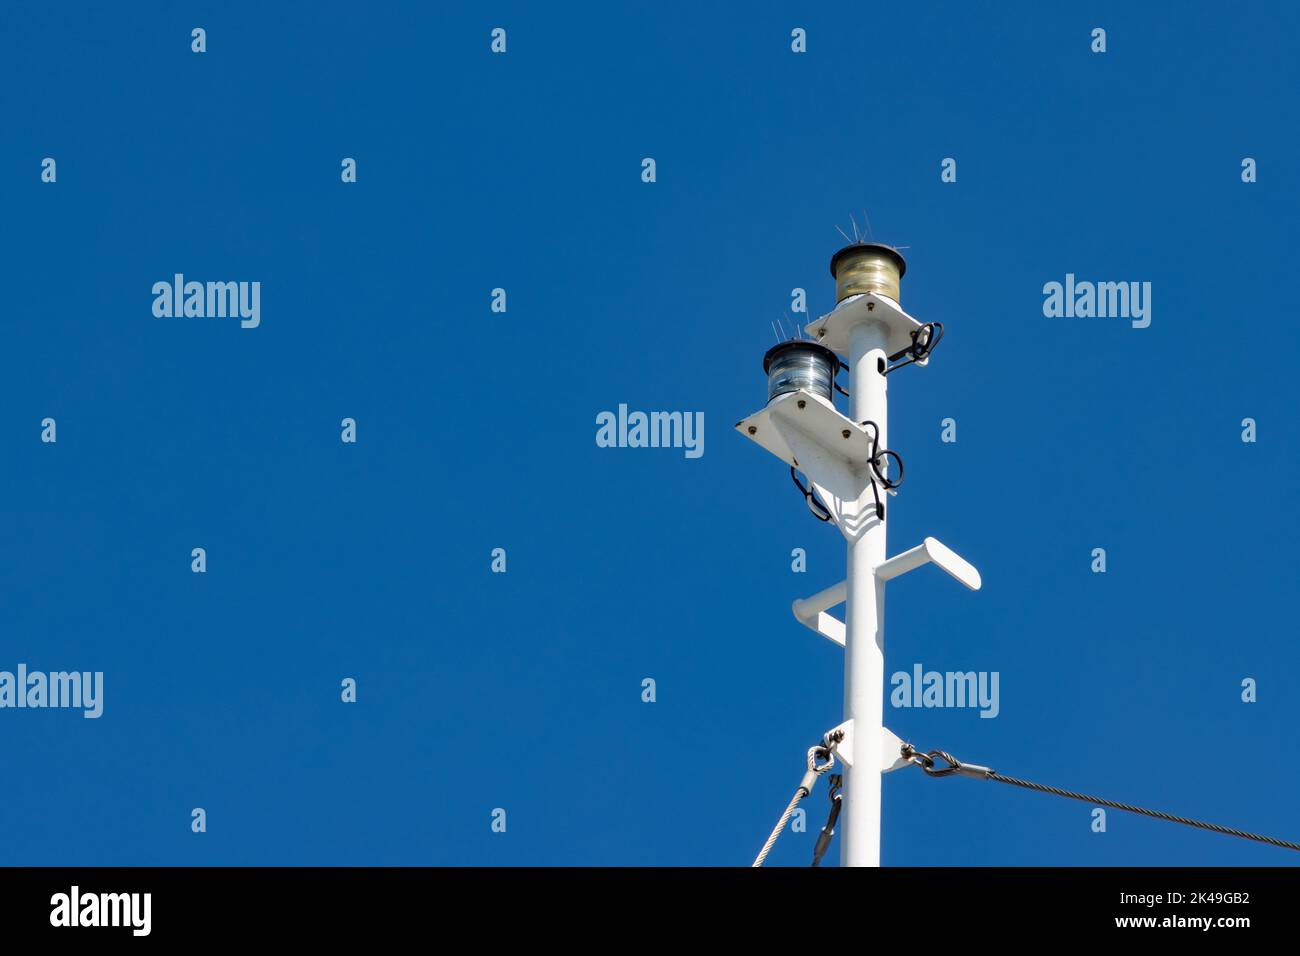 Position lights on the mast of a ship Stock Photo